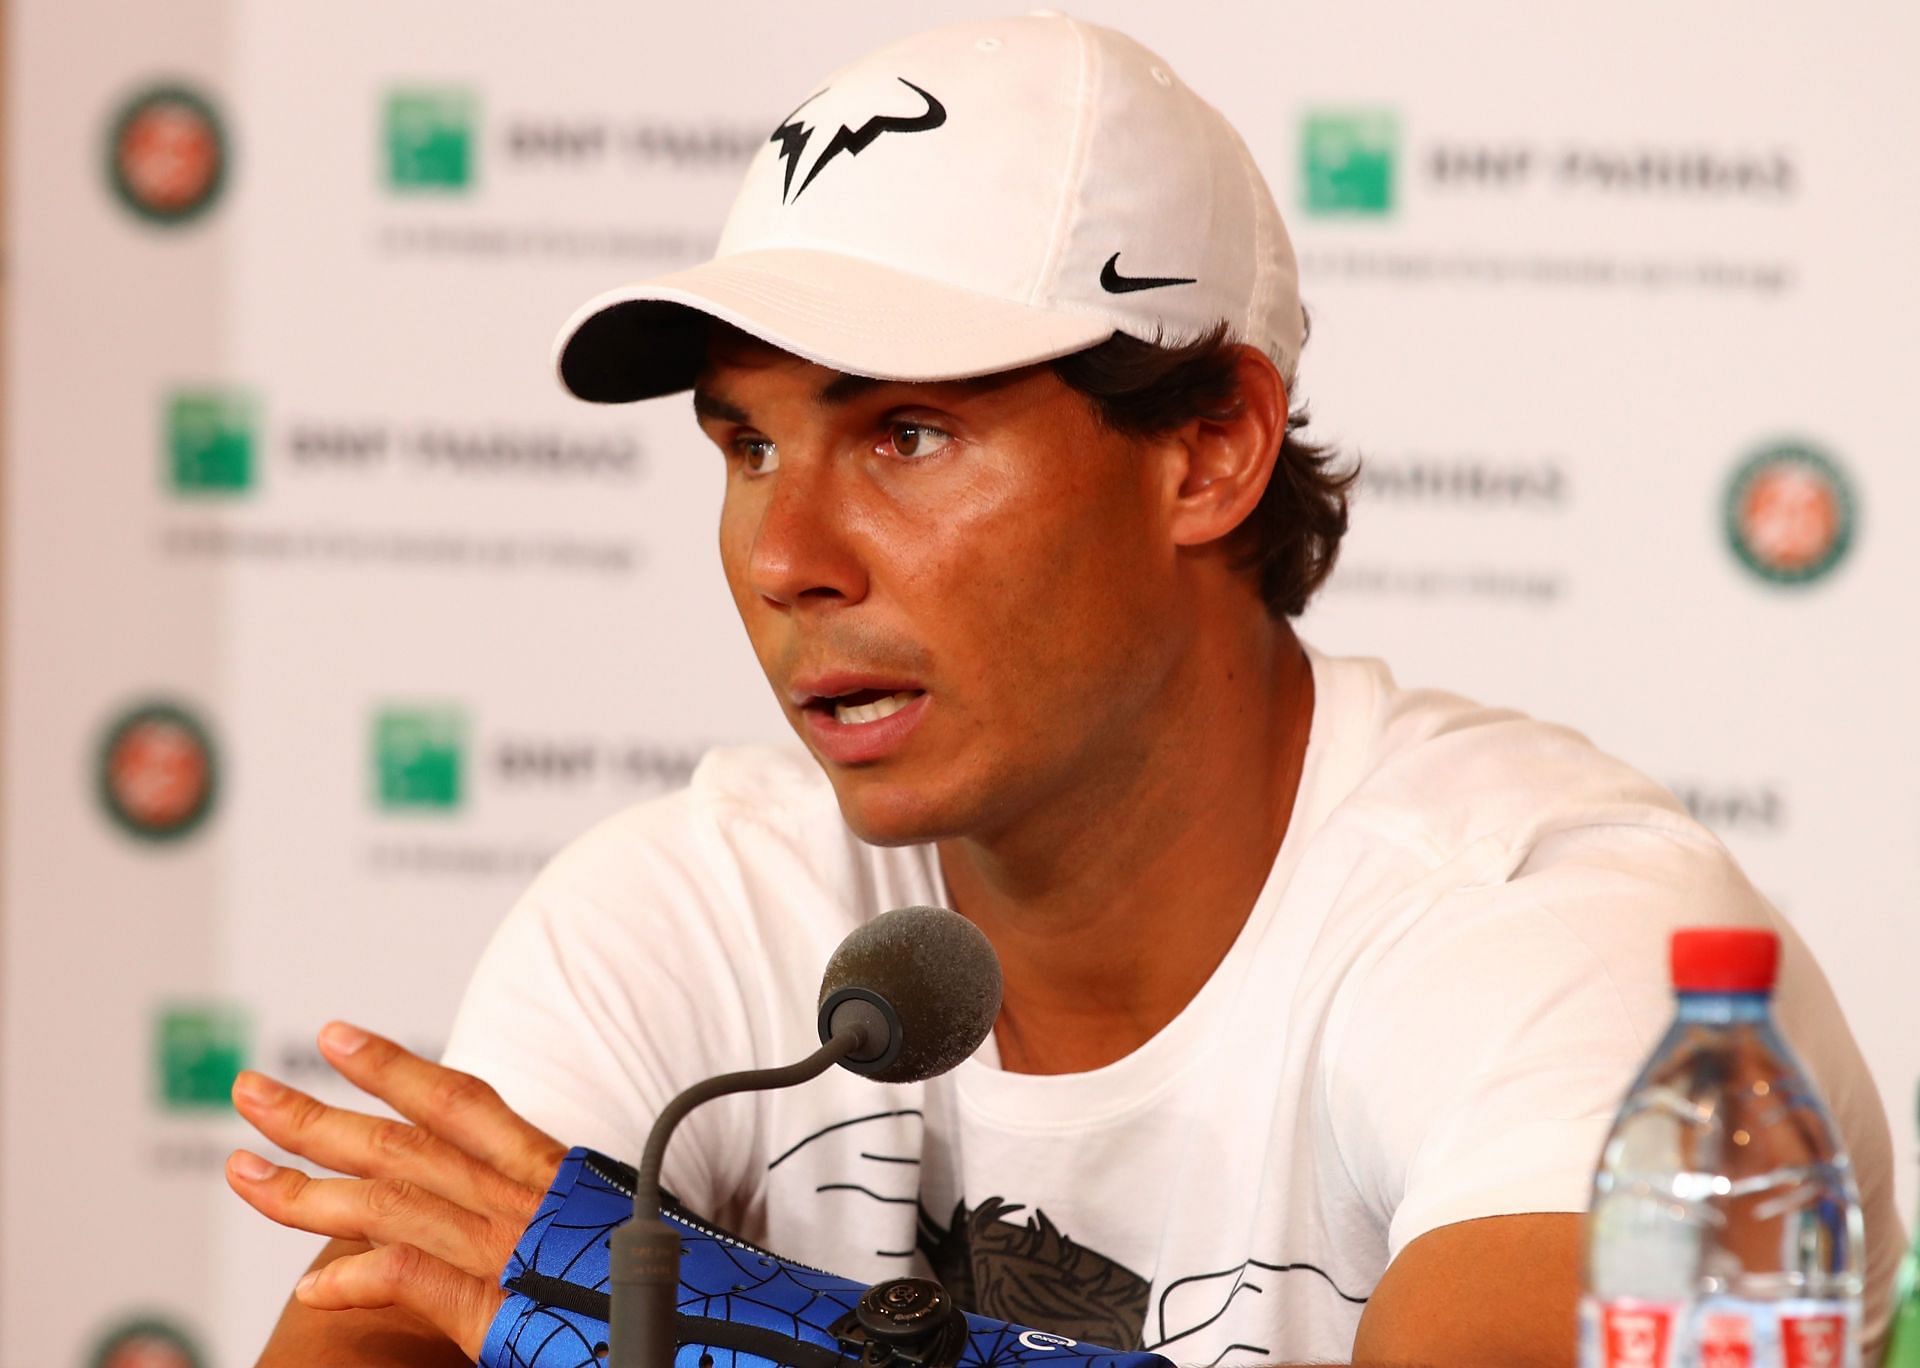 An unexpected stress fracture has robbed Rafael Nadal of the ideal start to the clay swing in 2022